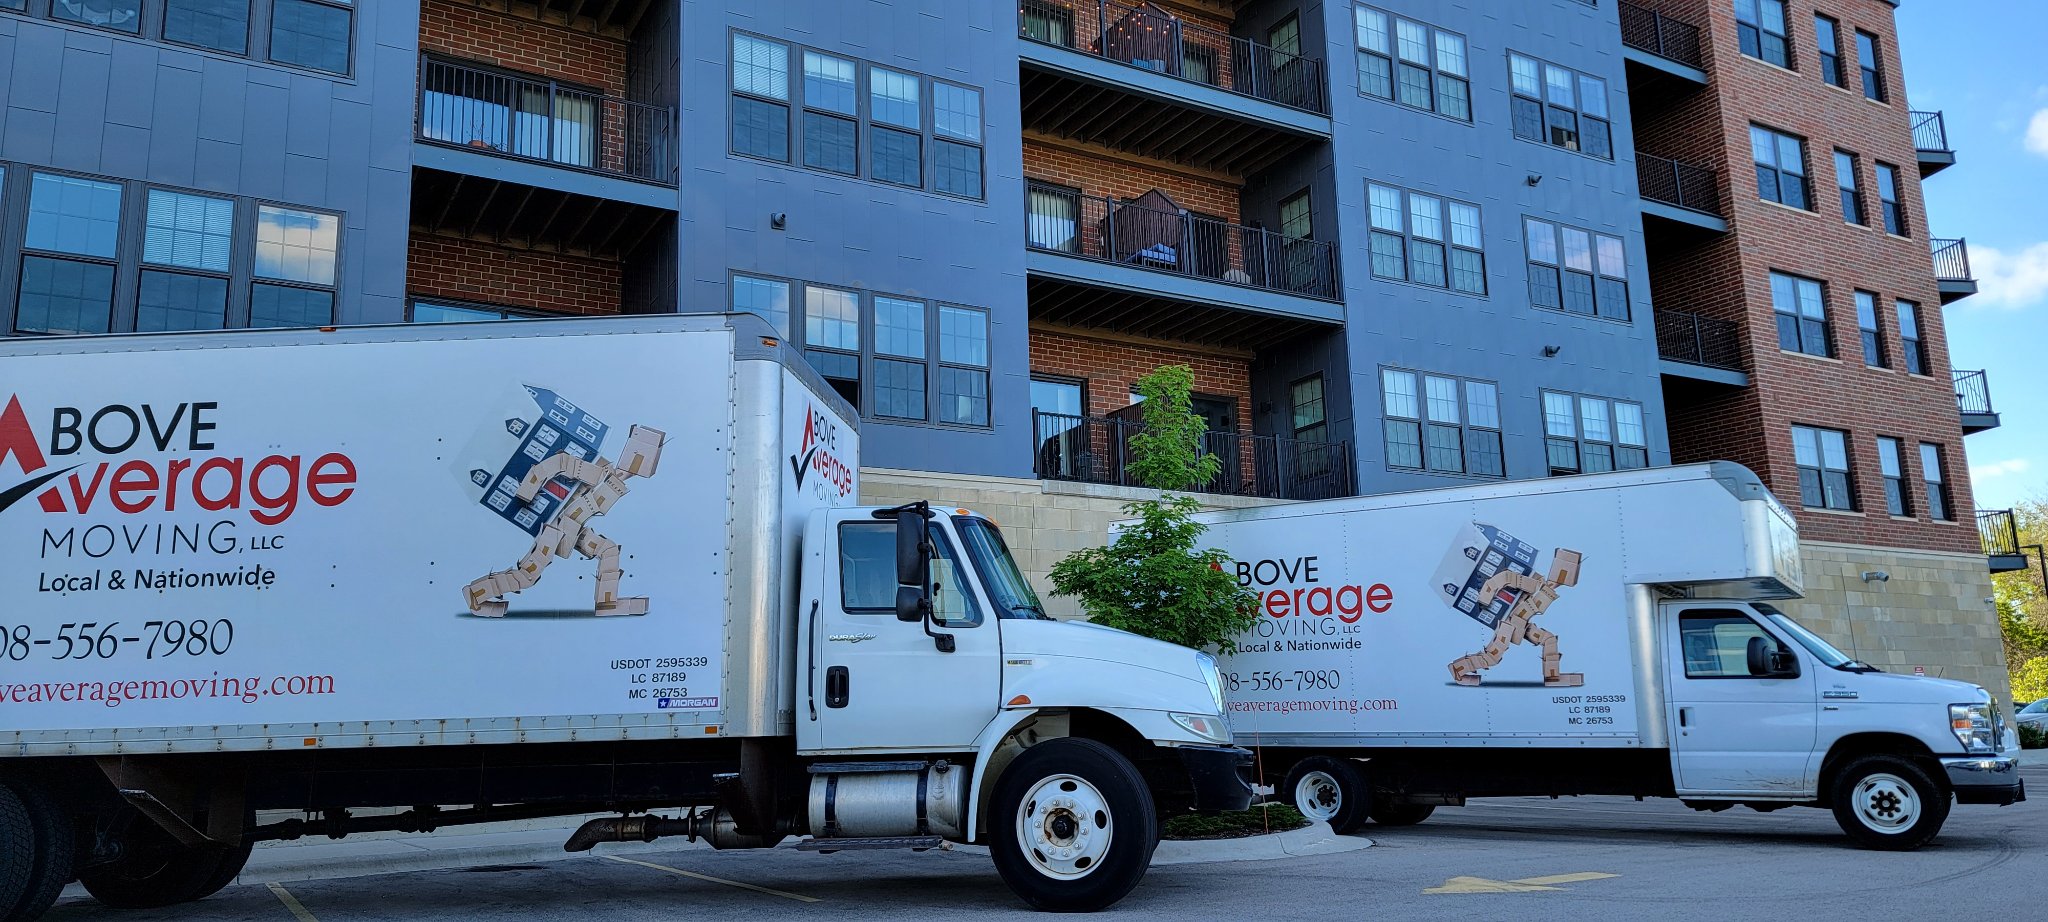 Above Average Moving LLC Moving Company in Madison